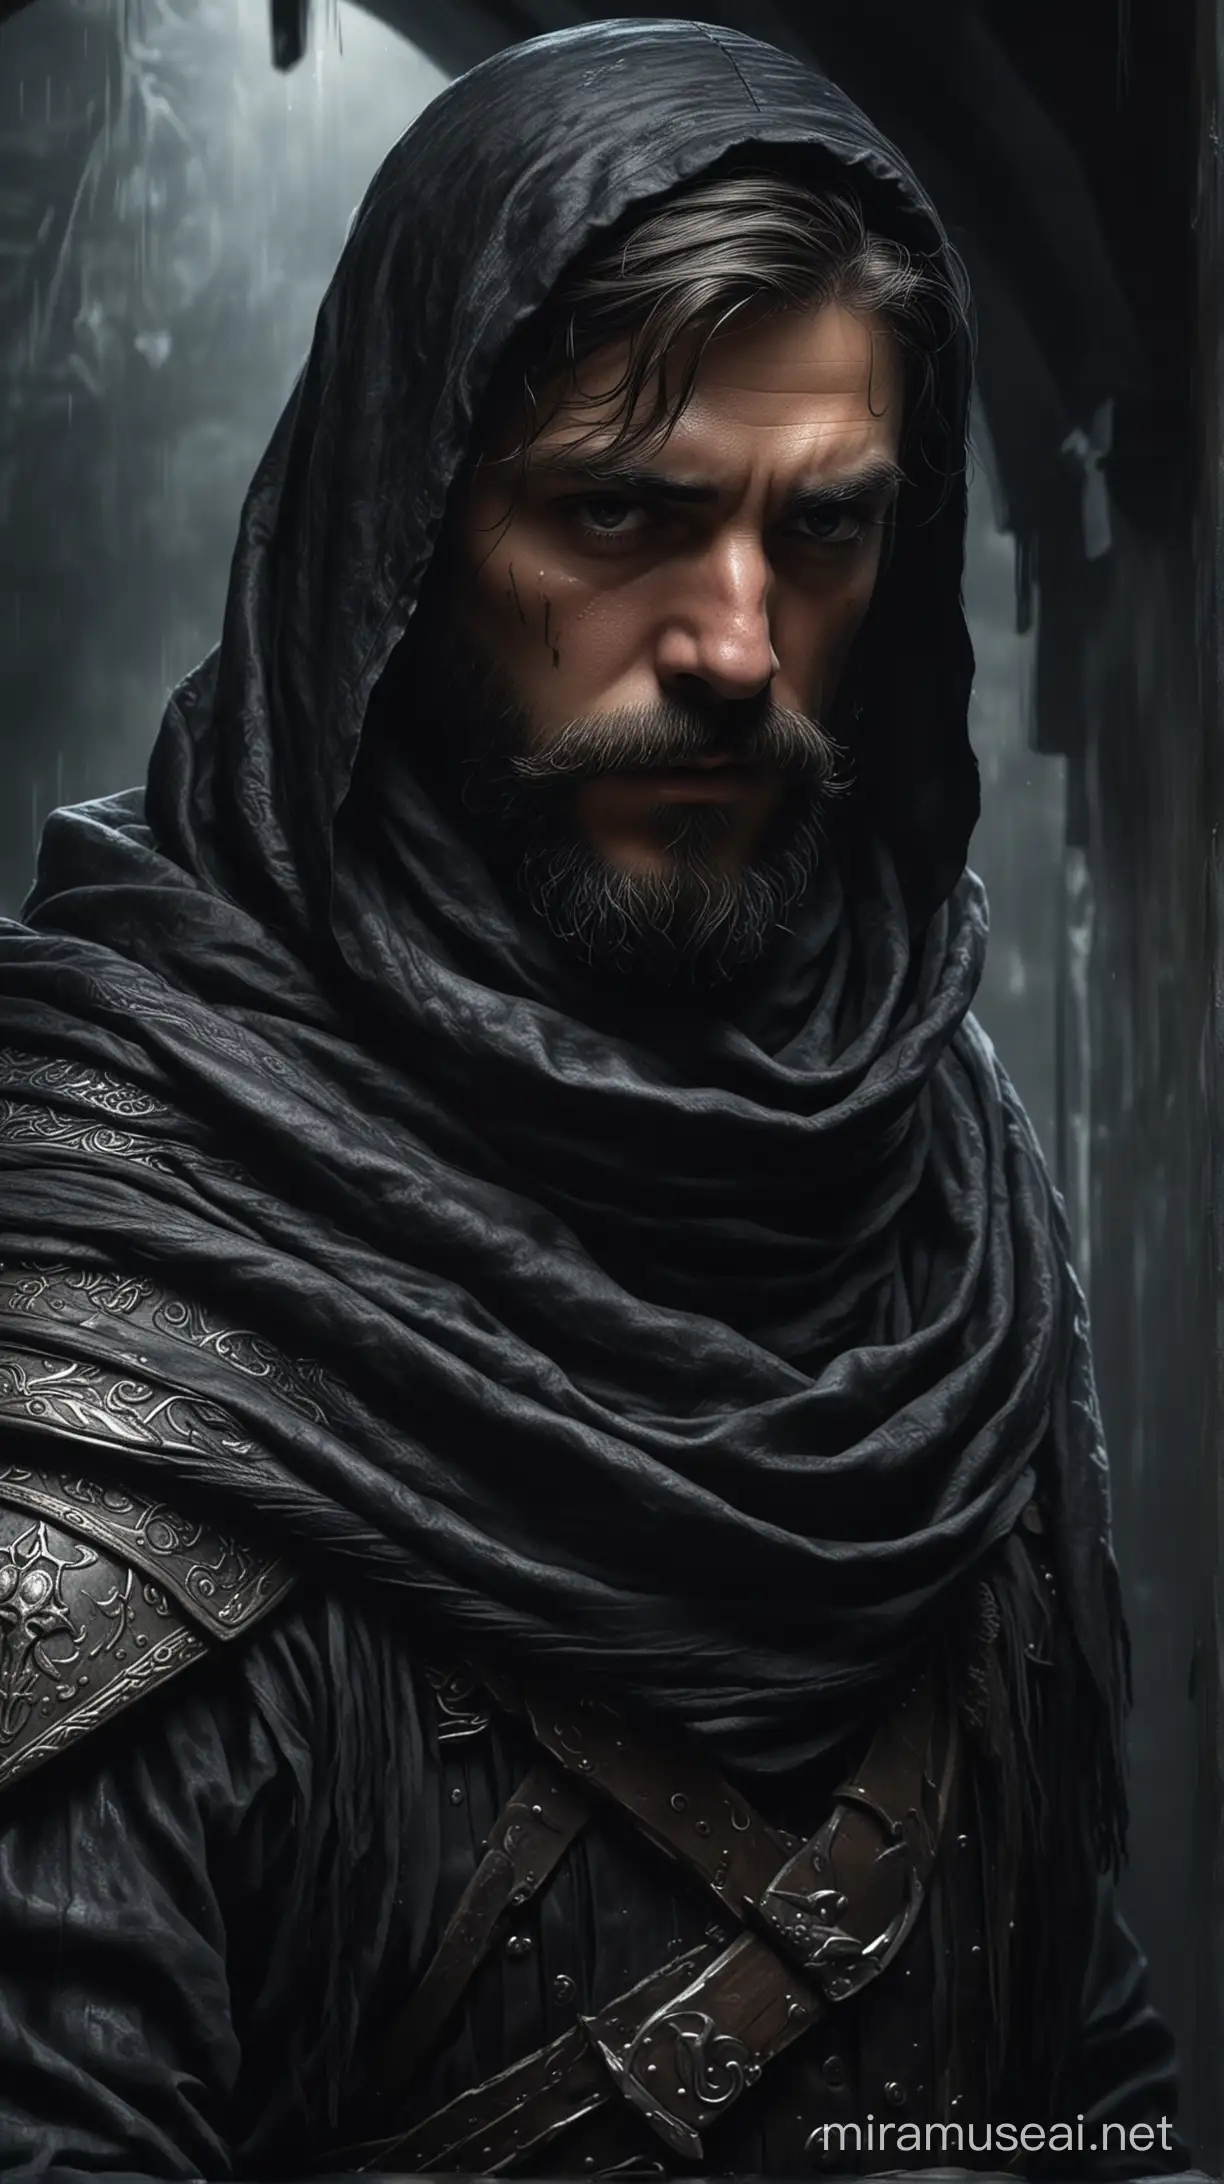 Brooding Medieval Warrior in Dark Glass House Digital Painting with Ultra Fine Details